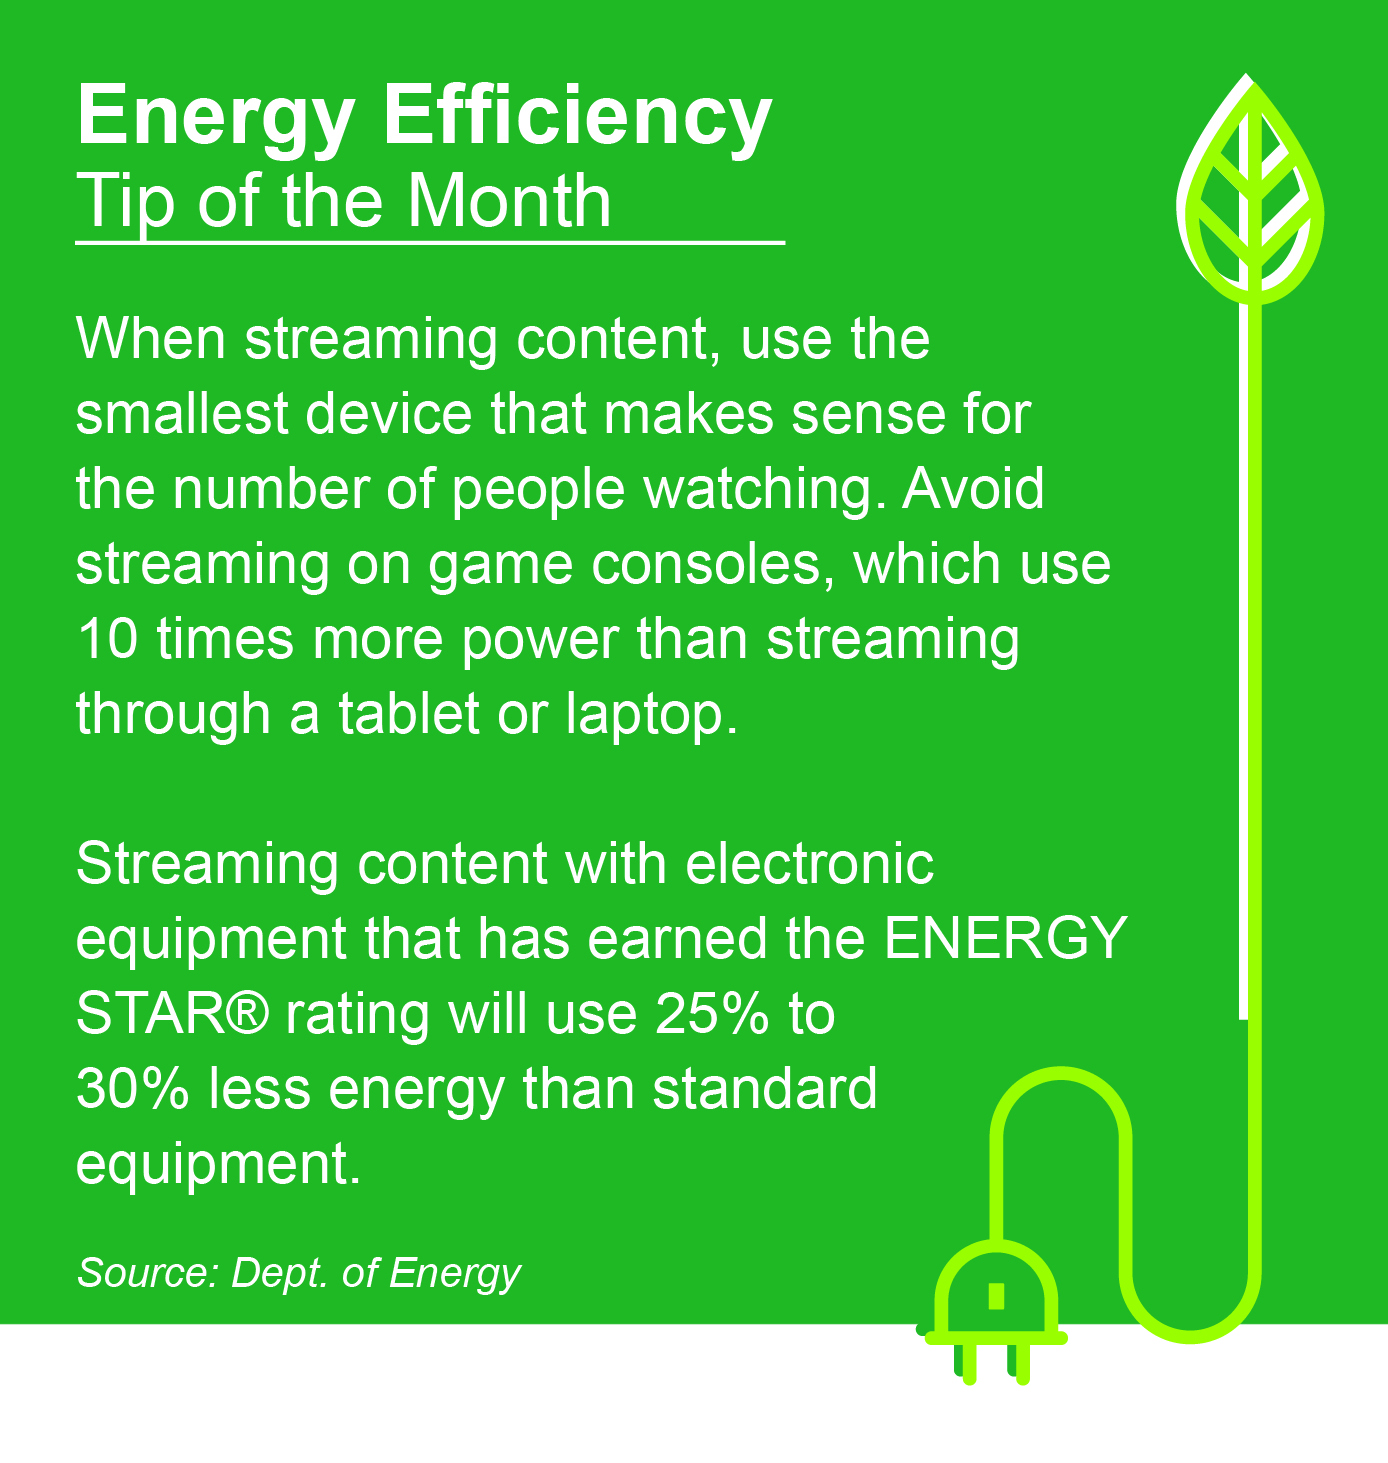 Energy Efficiency Tip of the Month: While streaming content, use the smallest device that makes sense for the number of people watching. Avoid streaming on game consoles, which use 10 times more power than streaming through a tablet or laptop. Streaming content with electronic equipment that has earned the ENERGY STAR® rating will use 25% to 30% less energy than standard equipment.